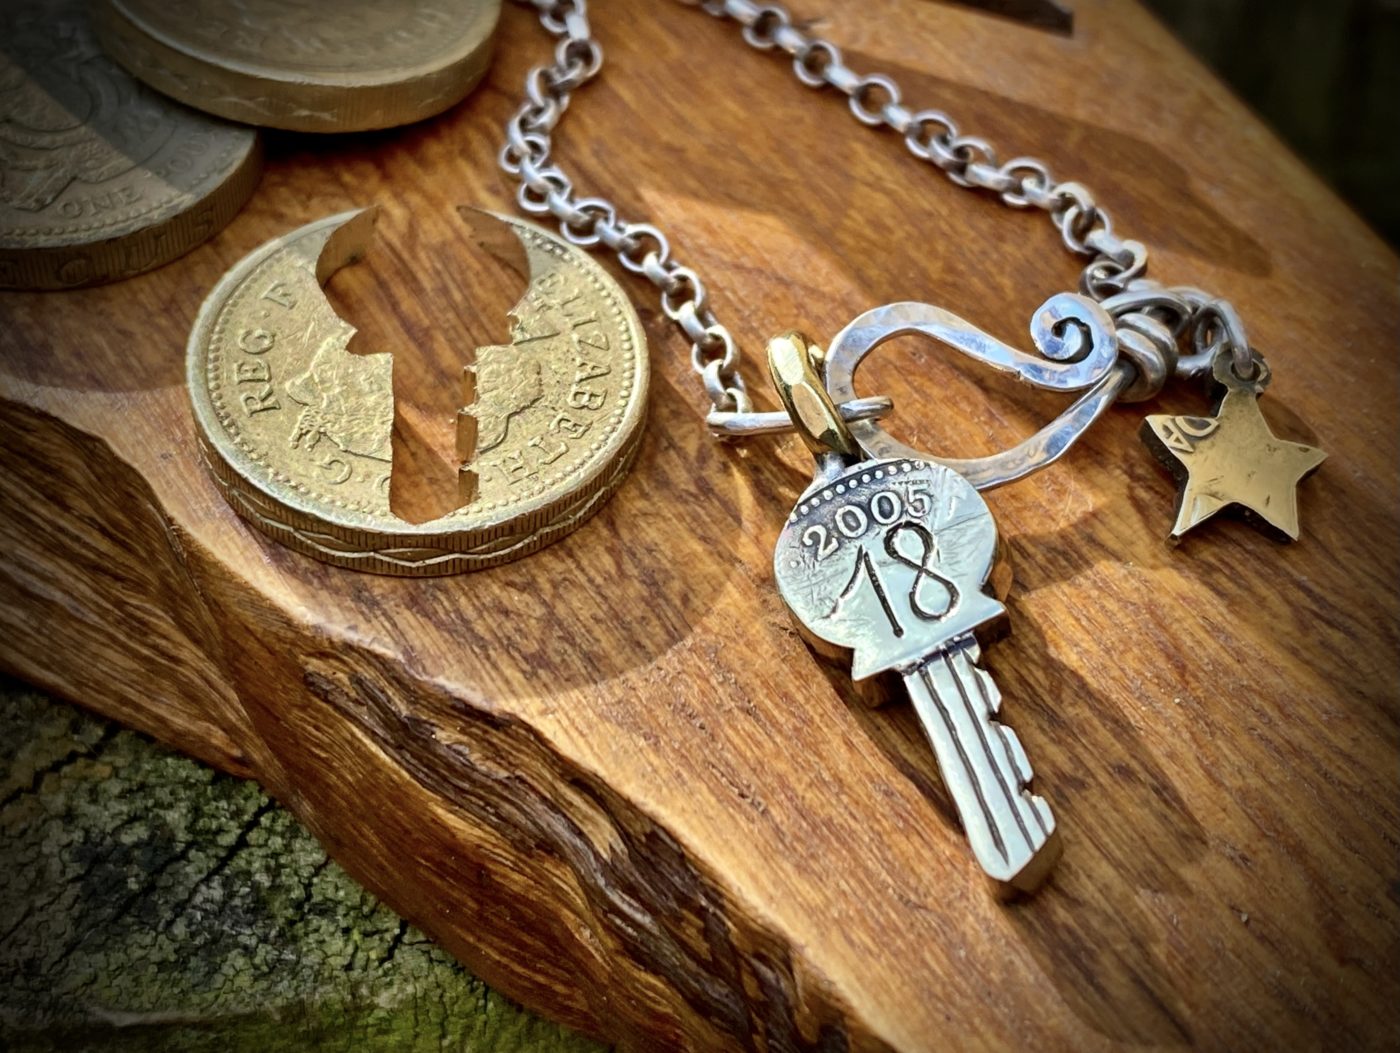 18th birthday gift idea handmade and ethically recycled key necklace pendant made in England from a upcycled pound coin 2005